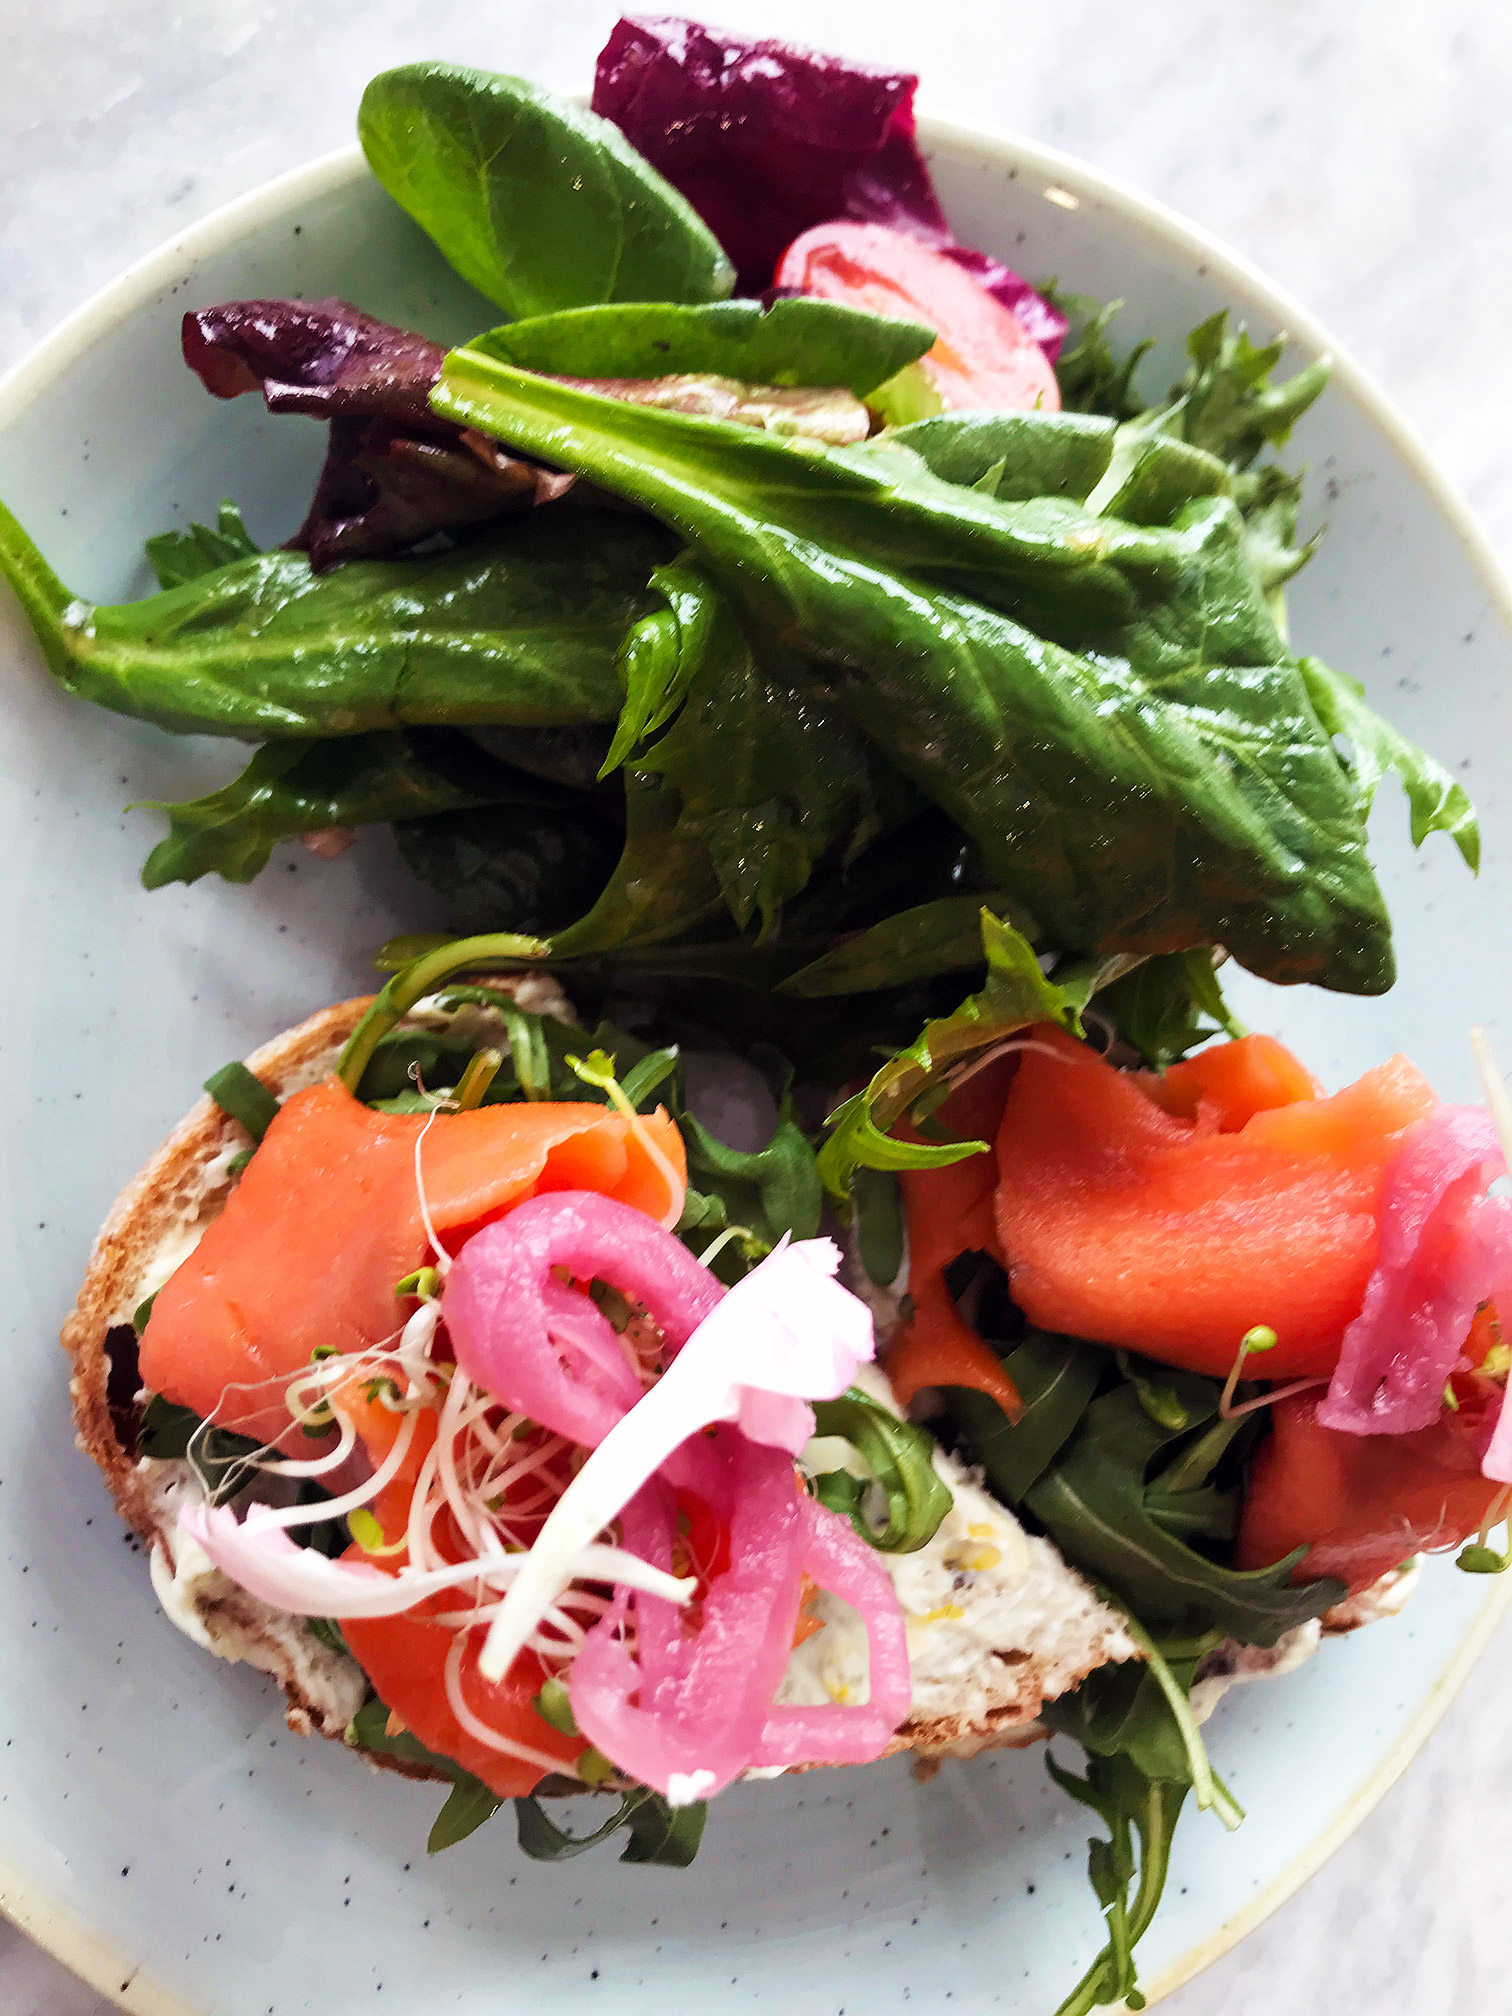 Salmon open-faced sandwich with beets, spinach, sprouts, tomato and endive